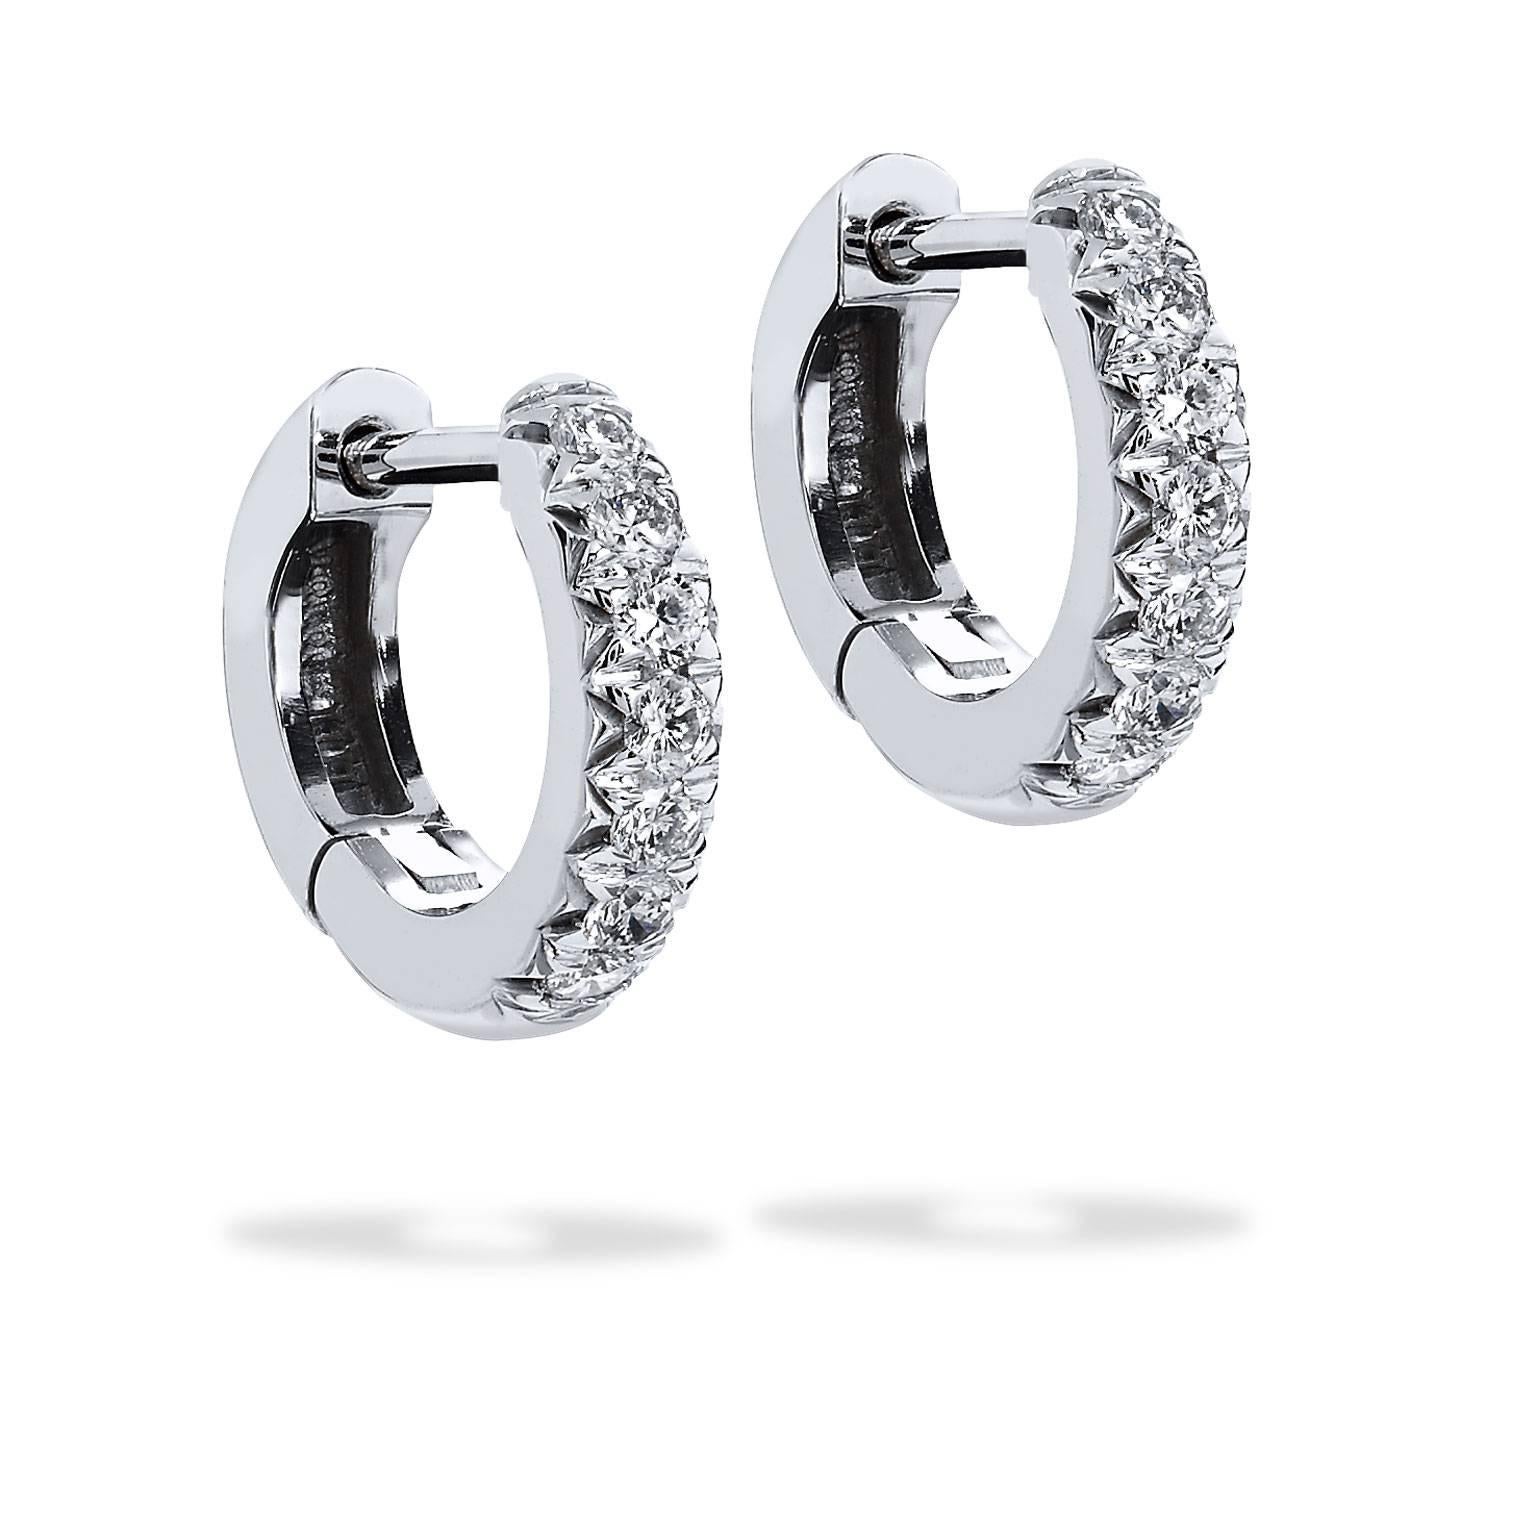 18 karat white gold acts as a backdrop to a beautiful sea of 0.23 carat of diamond pave set (G/H/VS) in these handmade H and H classic huggy hoop earrings measuring 11.30 mm.